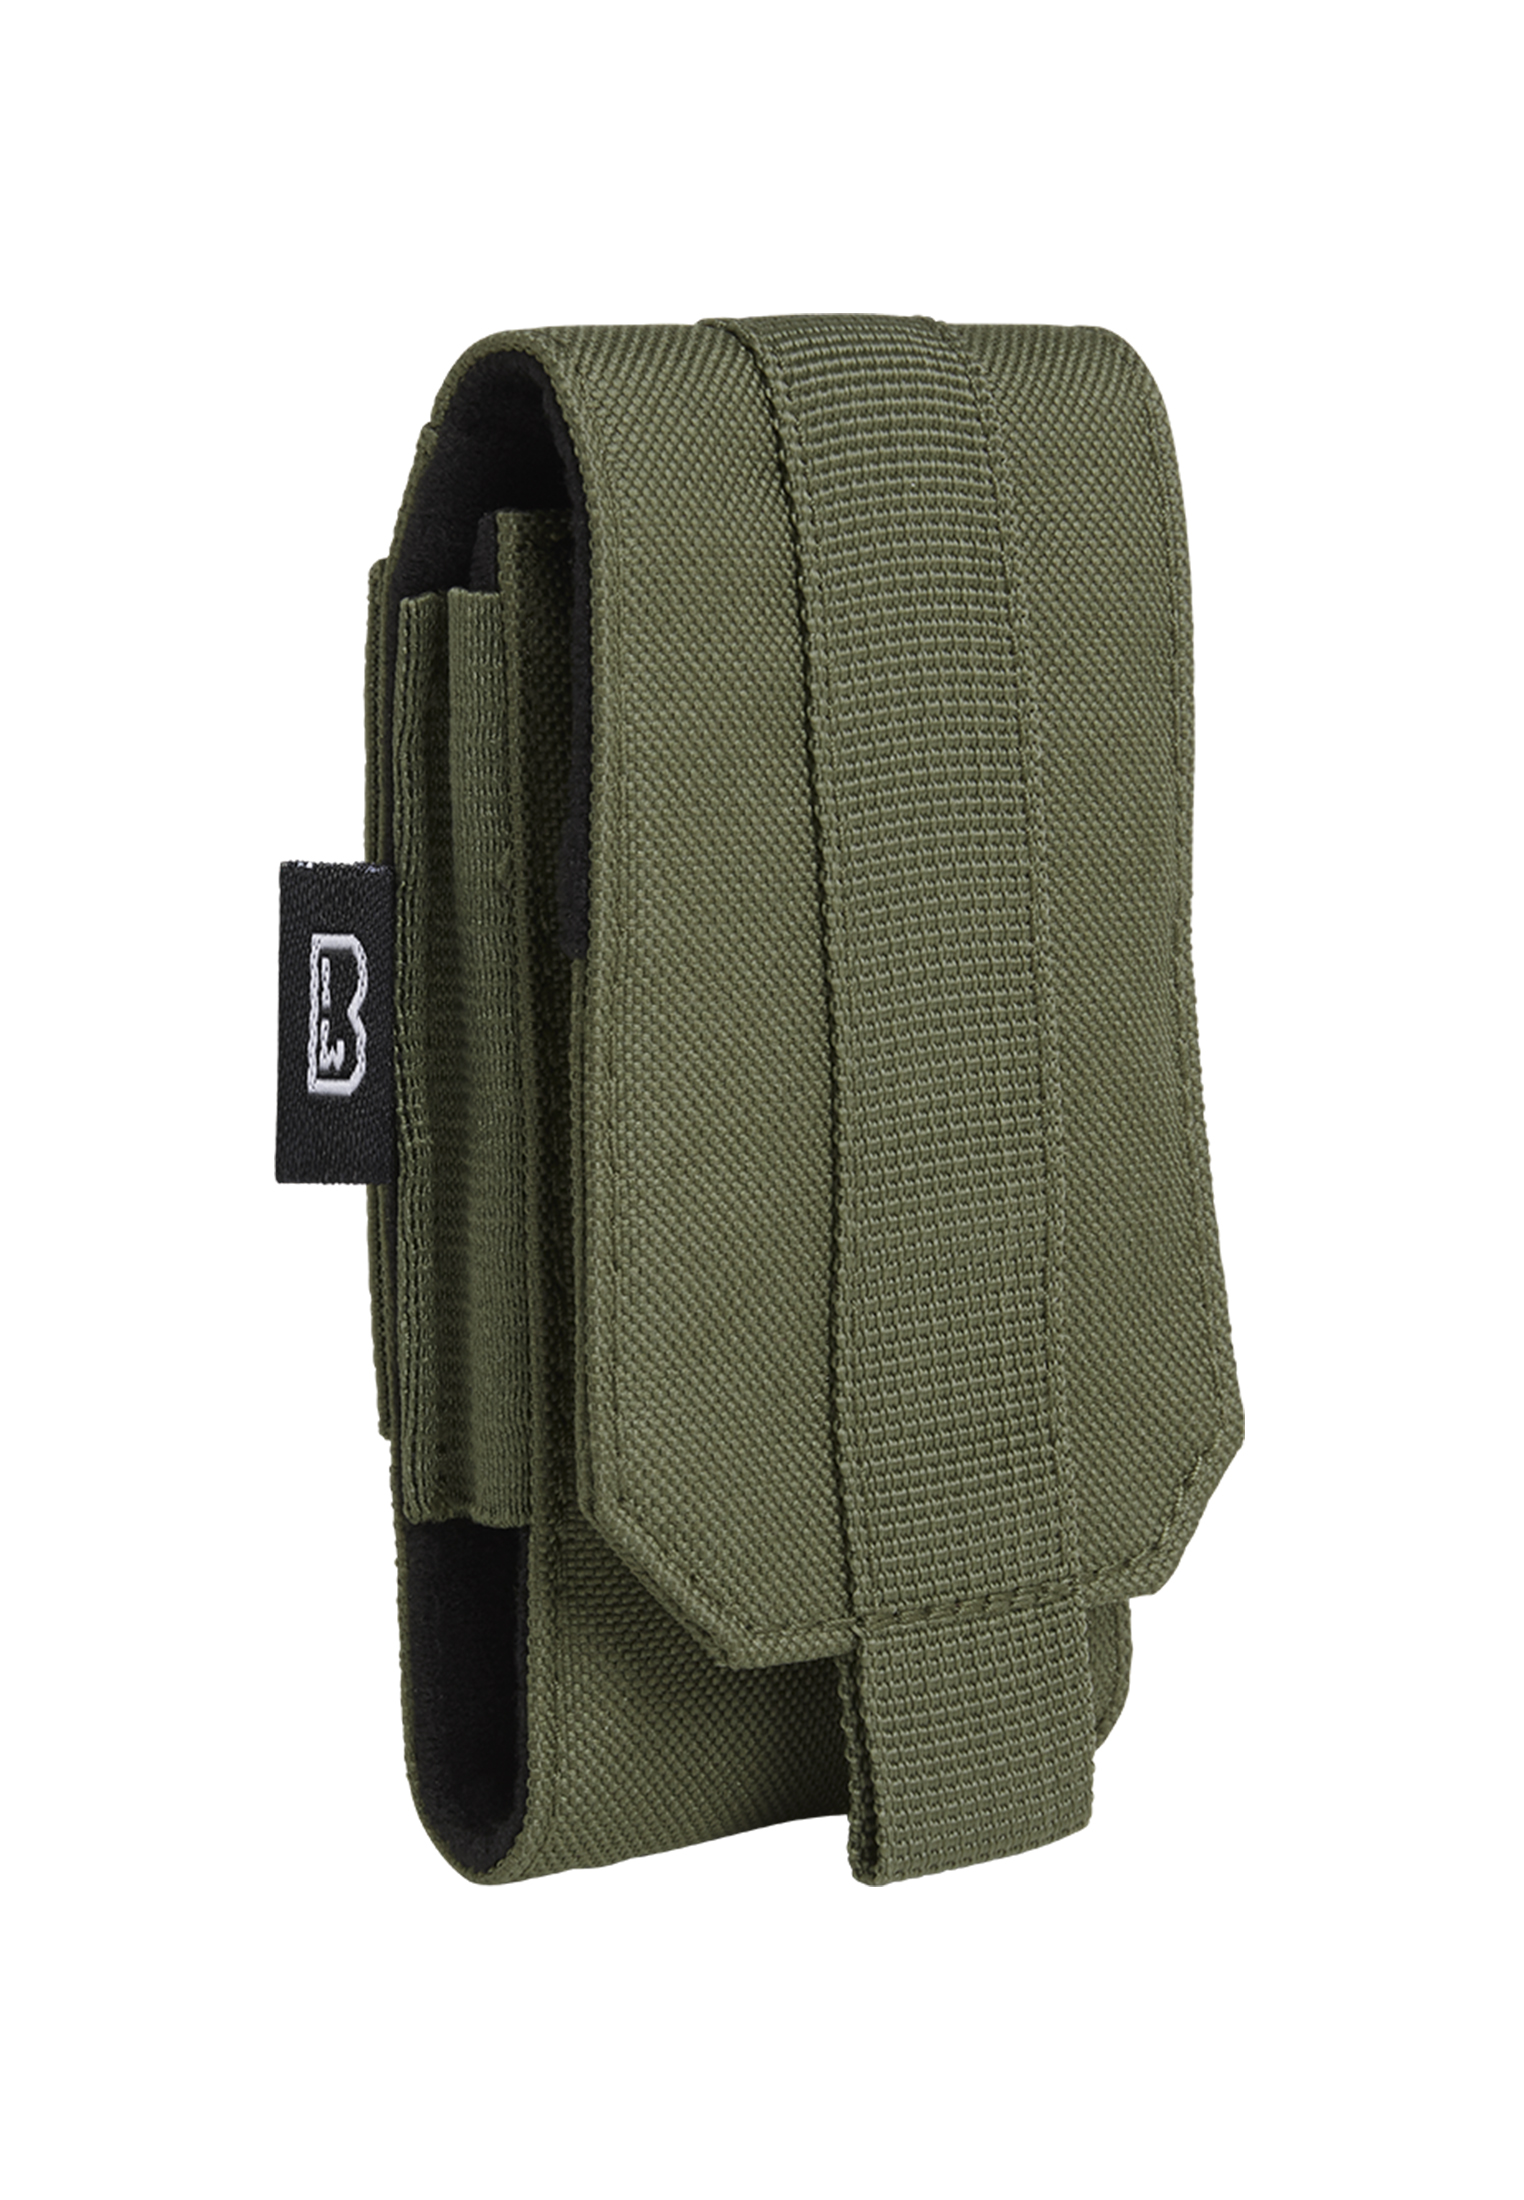 Molle Phone Pouch Medium Olive